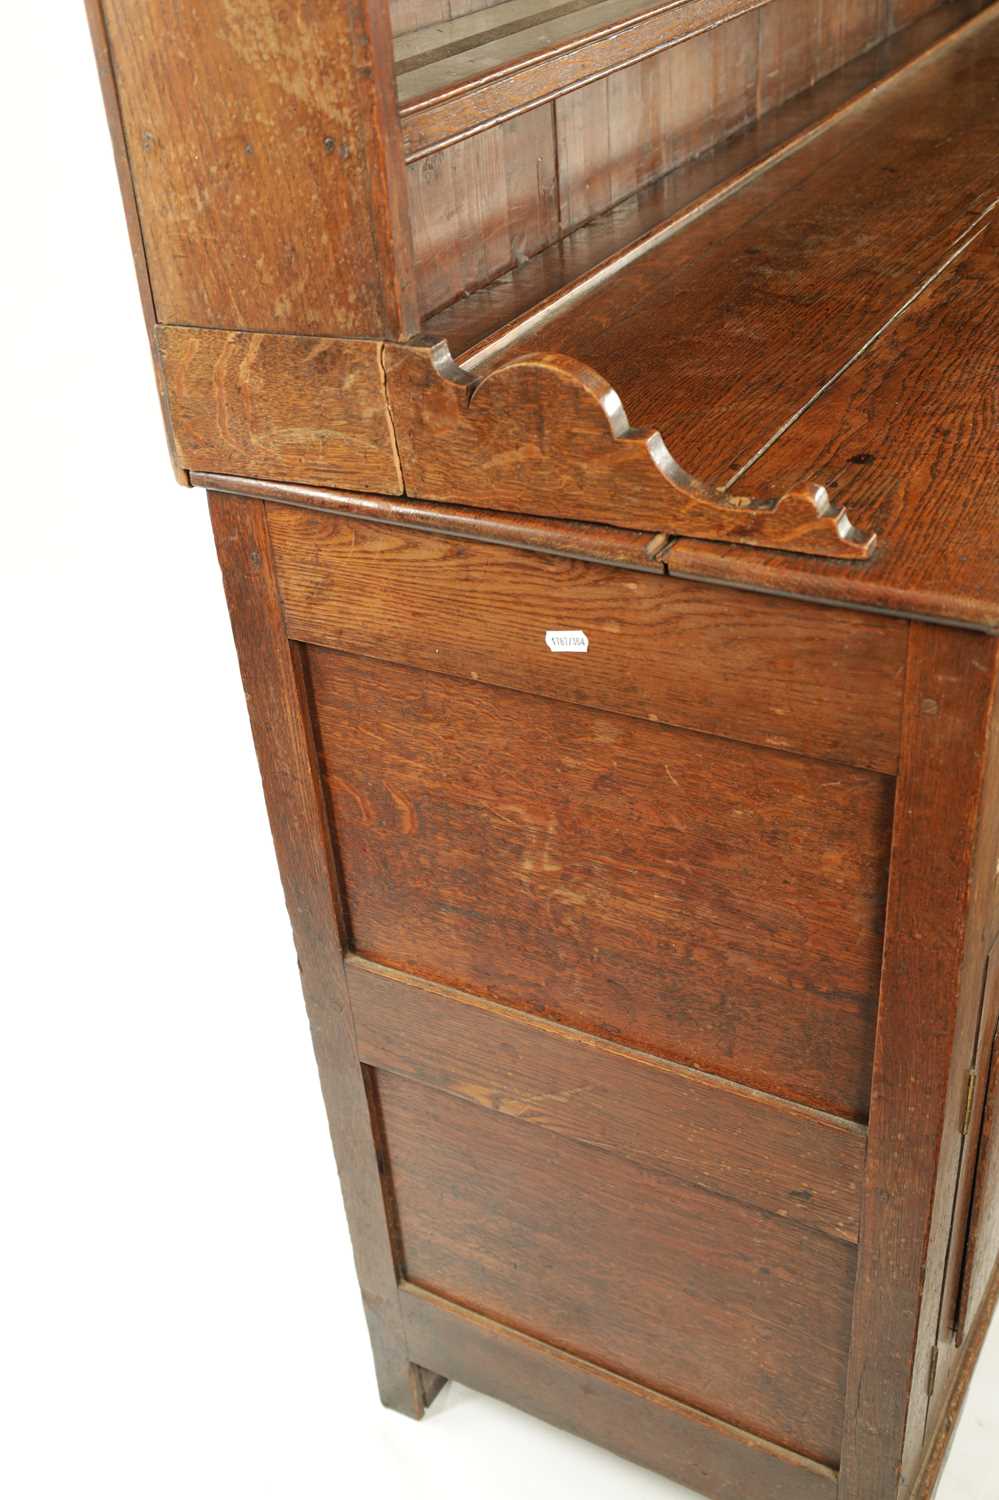 A LATE 18TH CENTURY WELSH OAK DRESSER AND RACK - Image 9 of 10